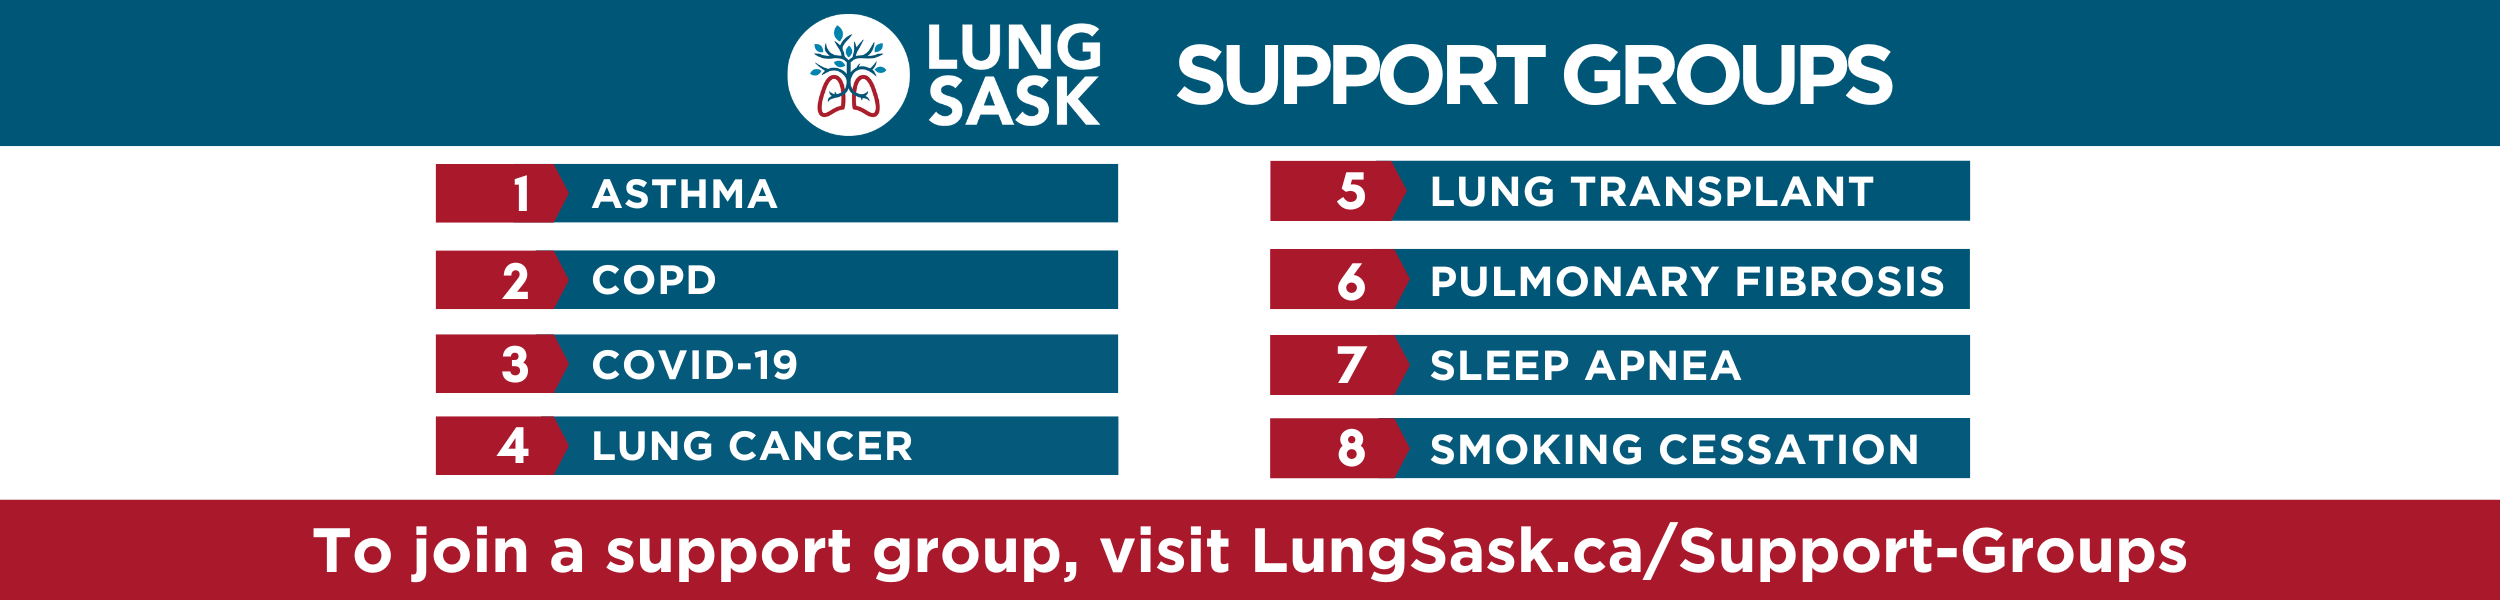 Lung Sask Support Groups